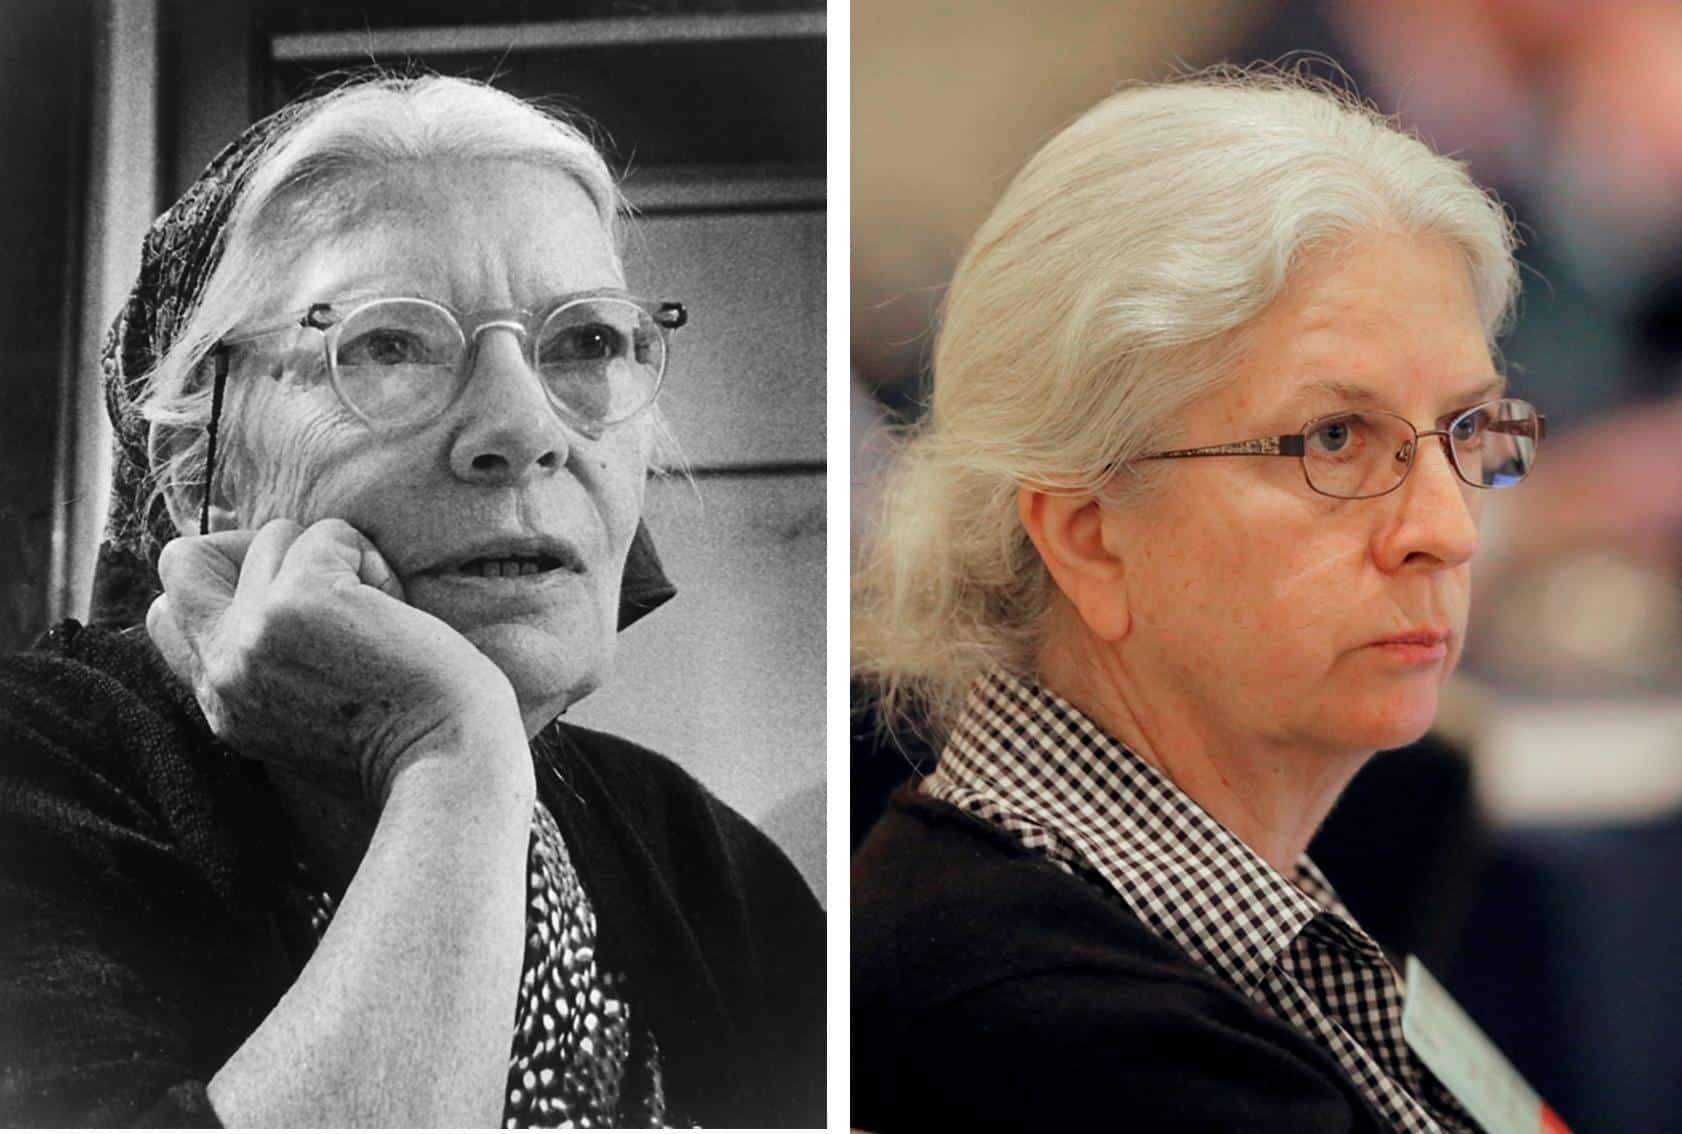 Martha Hennessy (right) has inherited more than just her appearance from her much-admired grandmother, Dorothy Day. Martha has also inherited the heart for social justice that made Dorothy Day famous, and could make her a saint. Photos: CNS 